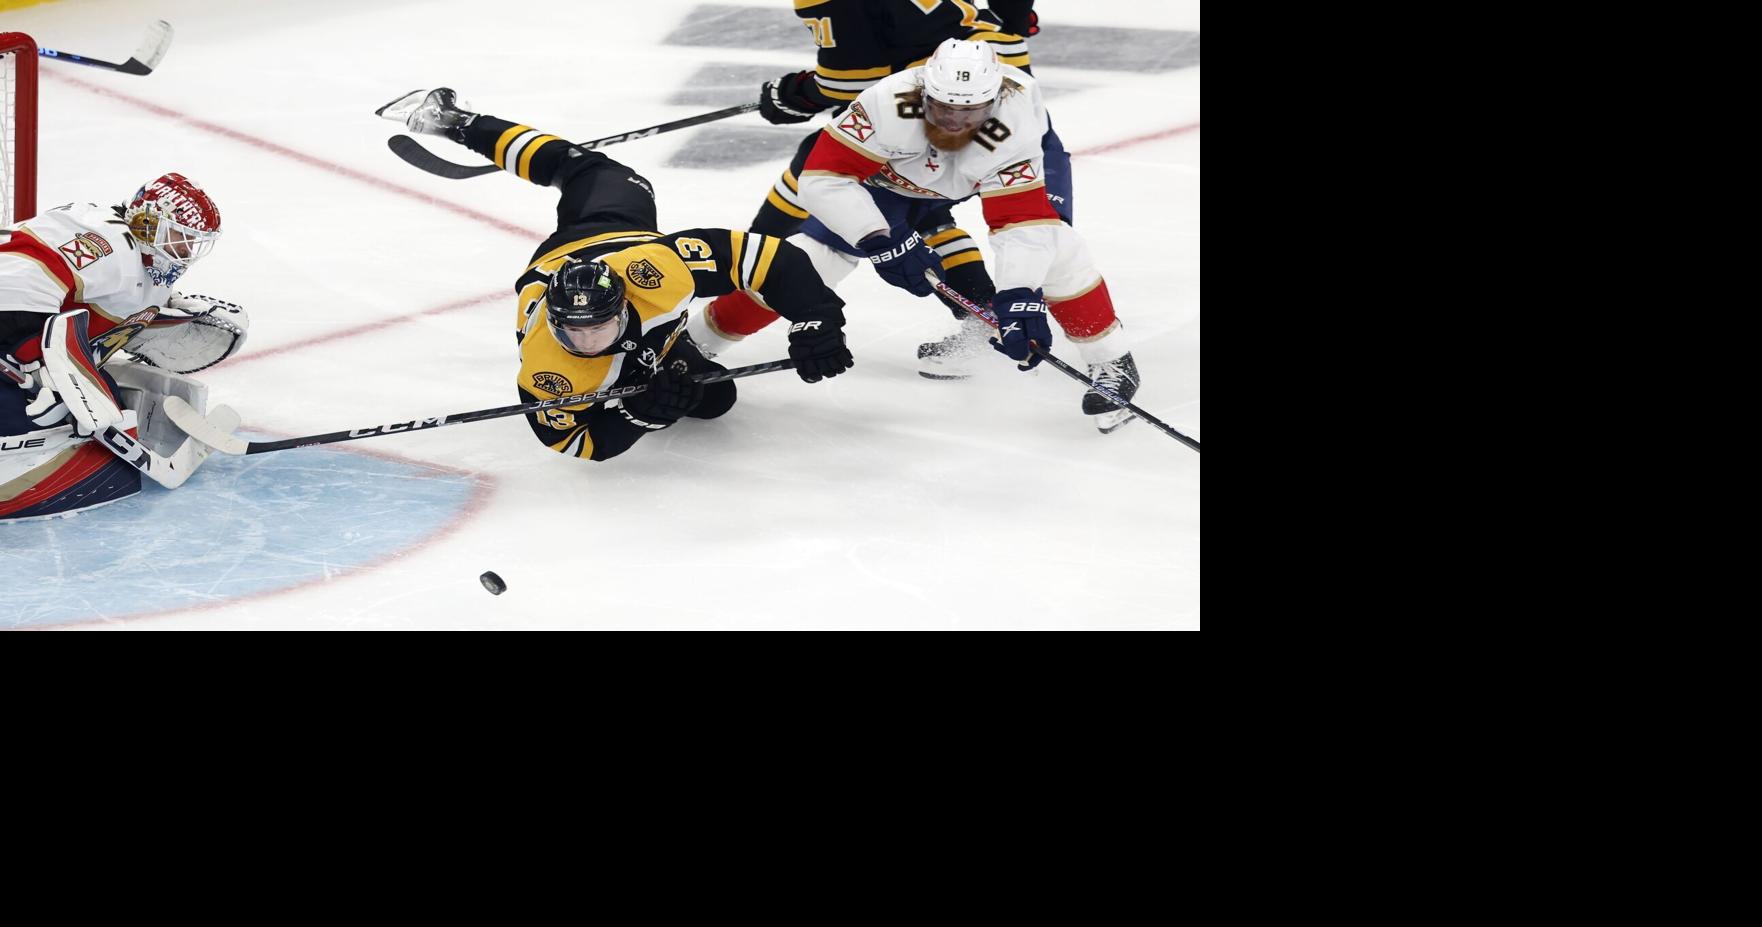 Panthers beat Bruins 4-3 in Game 5 OT to avoid elimination